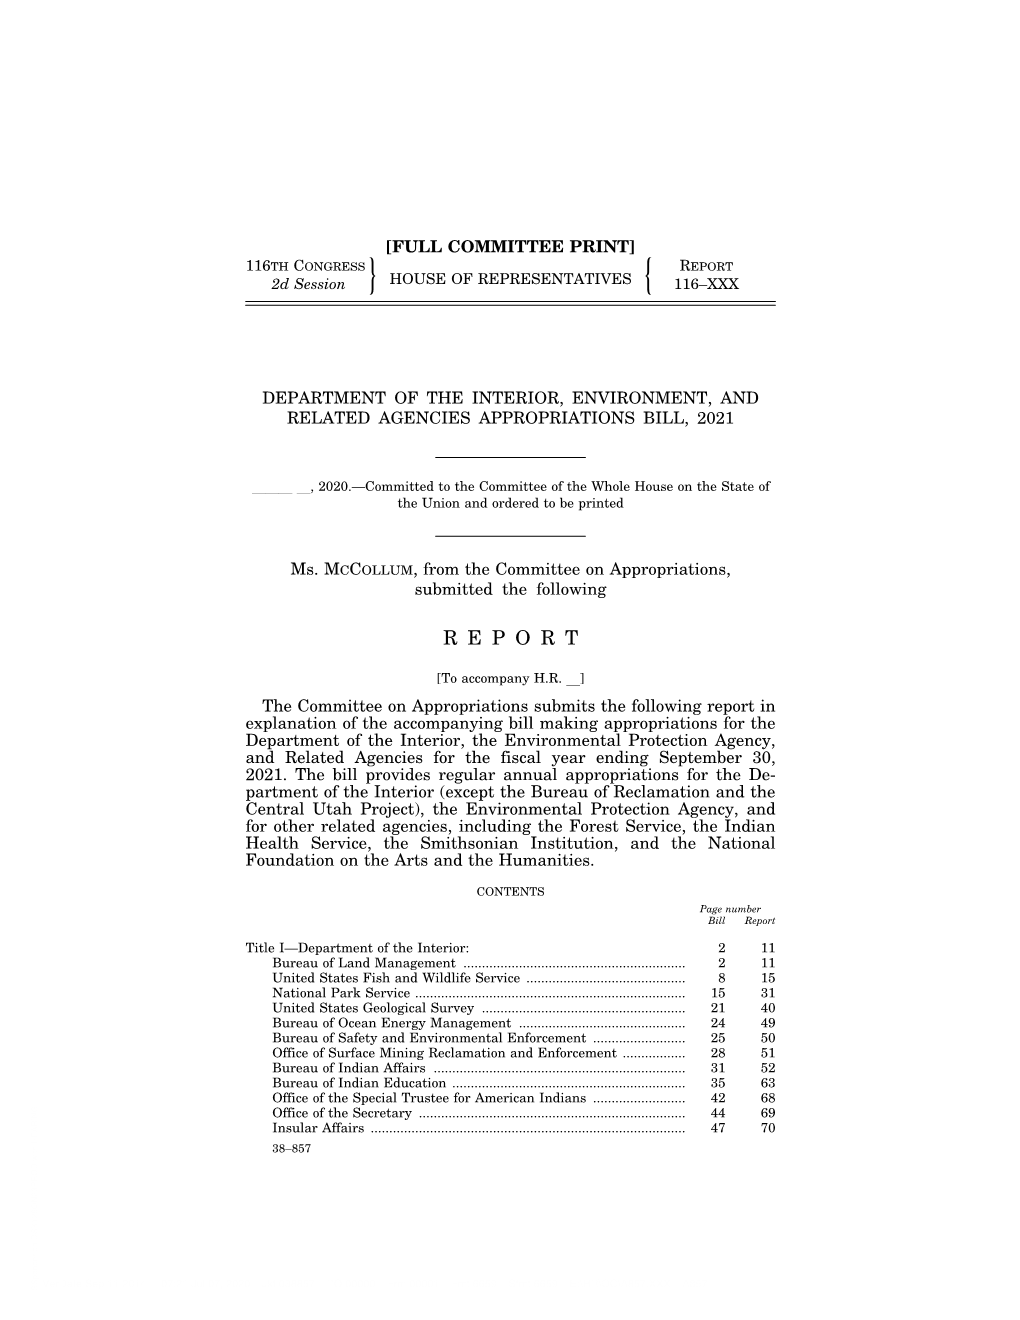 Committee a Report